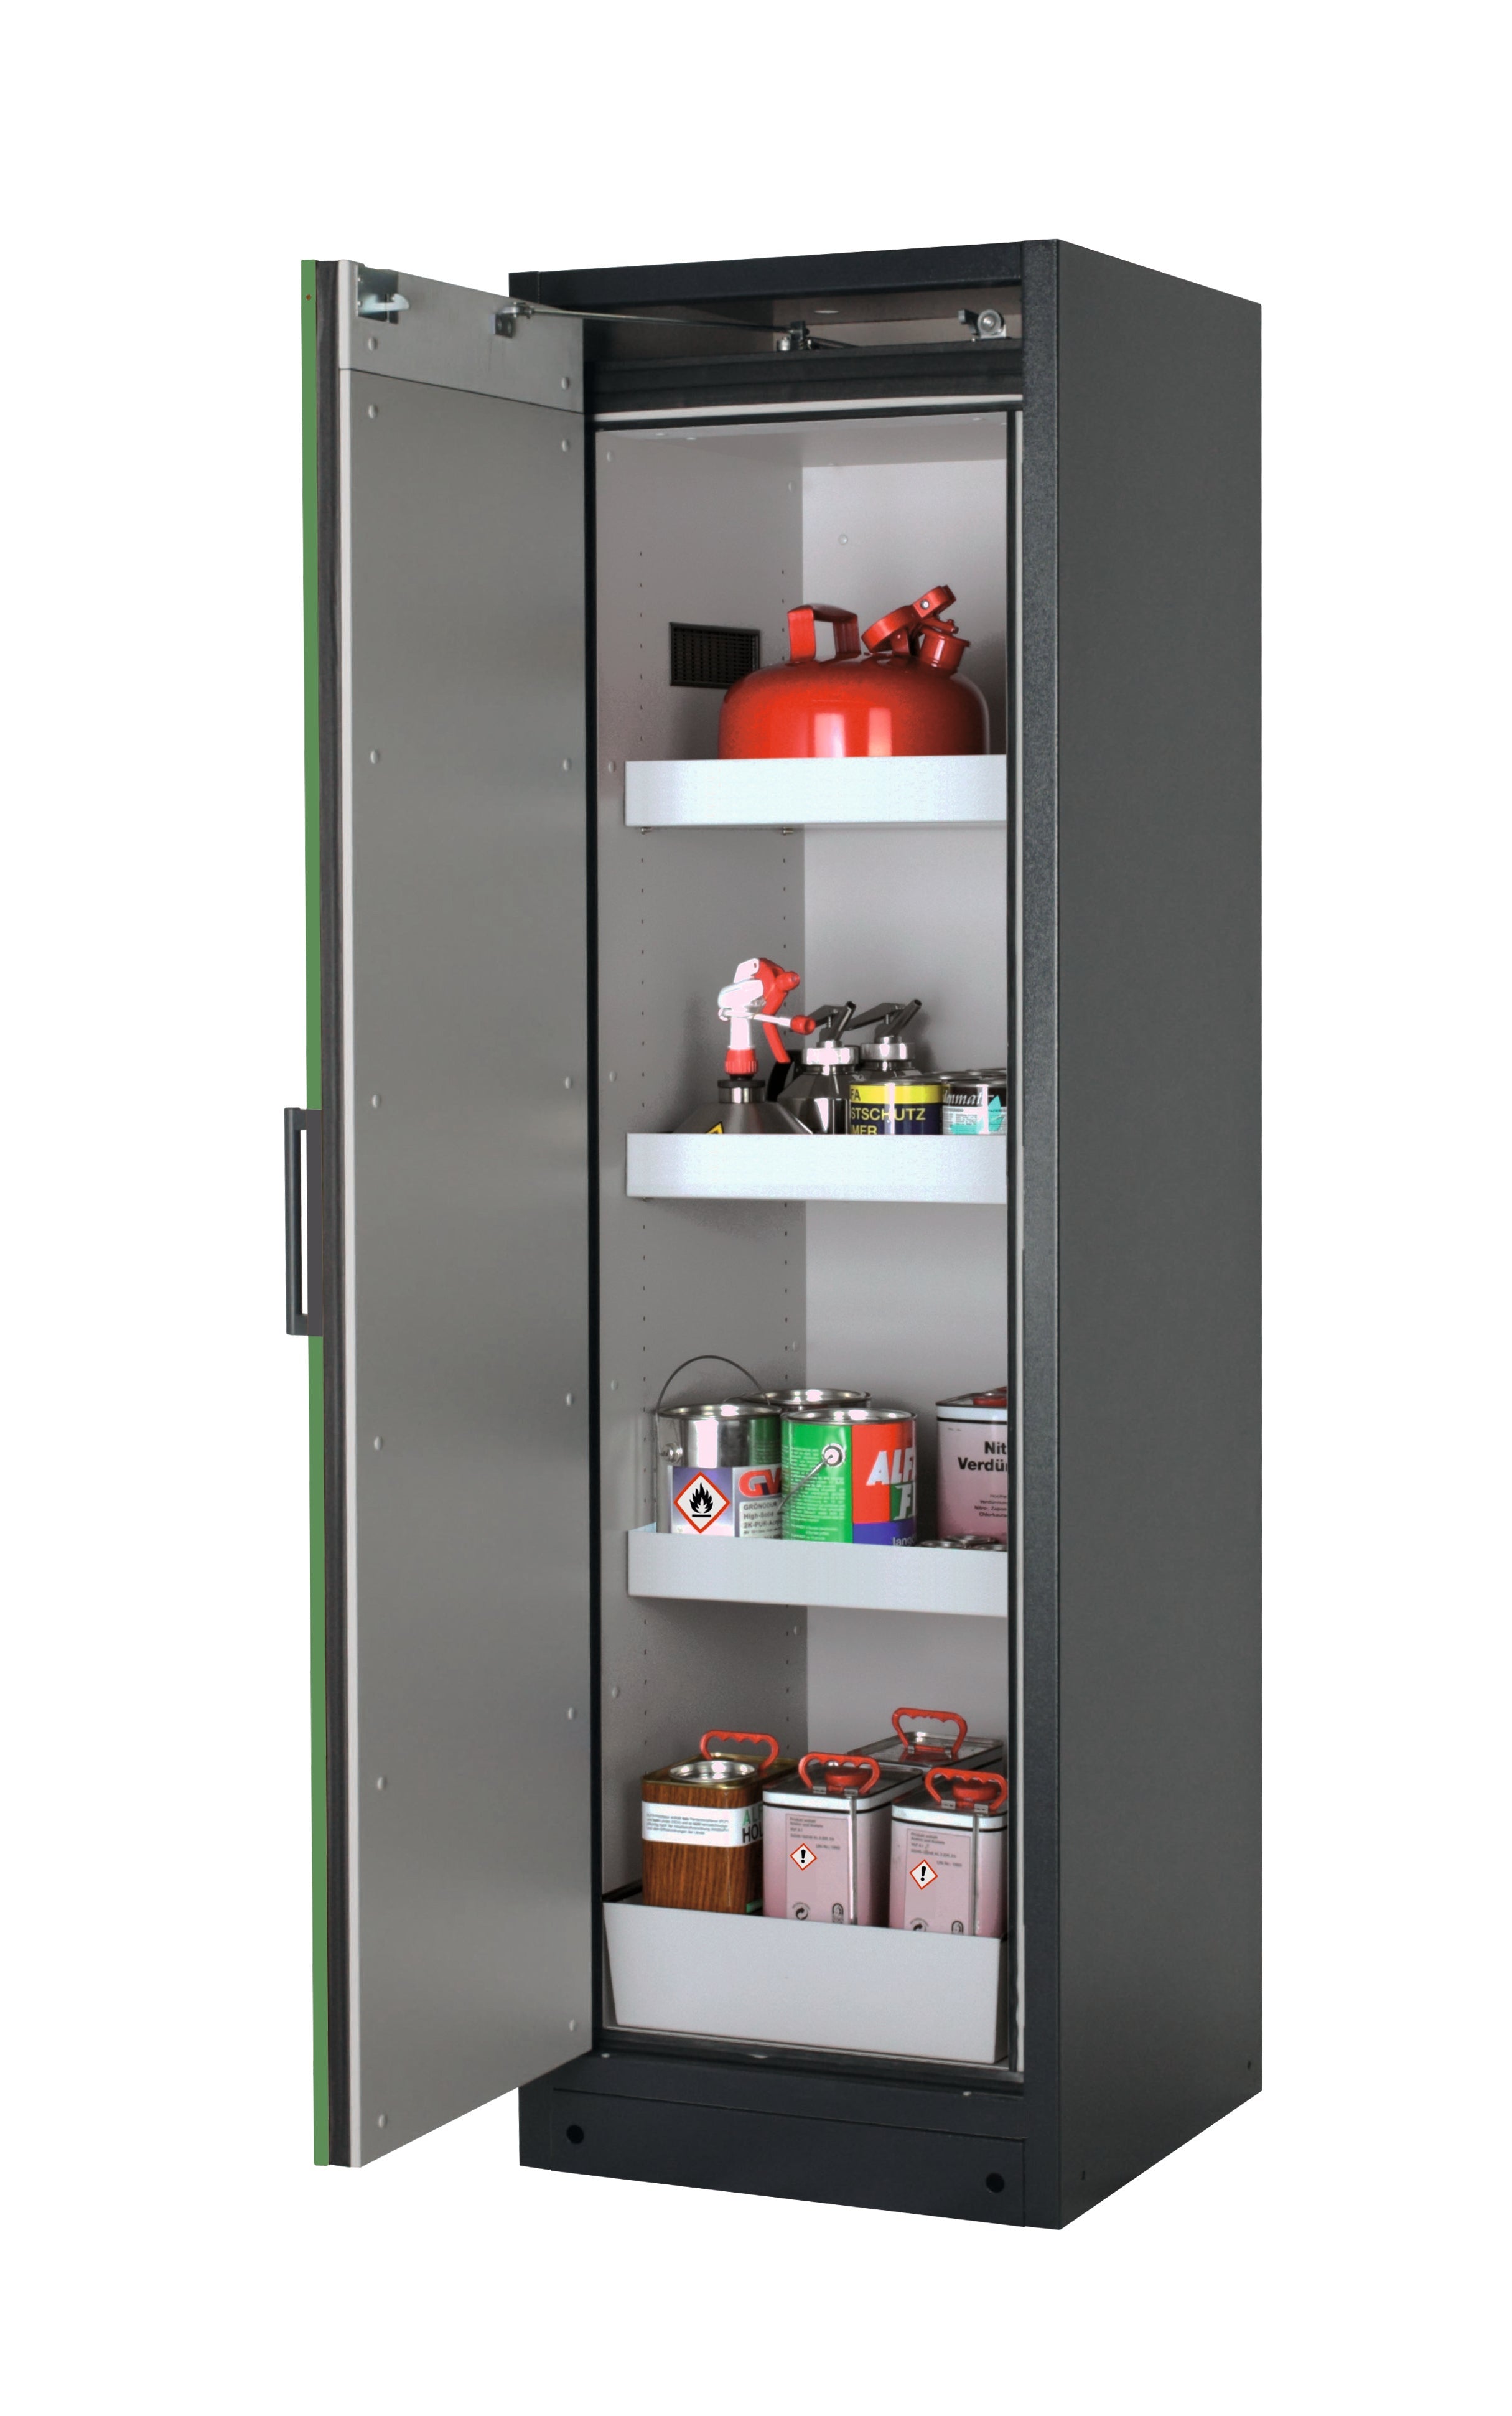 Type 90 safety storage cabinet Q-PEGASUS-90 model Q90.195.060.WDAC in reseda green RAL 6011 with 3x tray shelf (standard) (sheet steel),